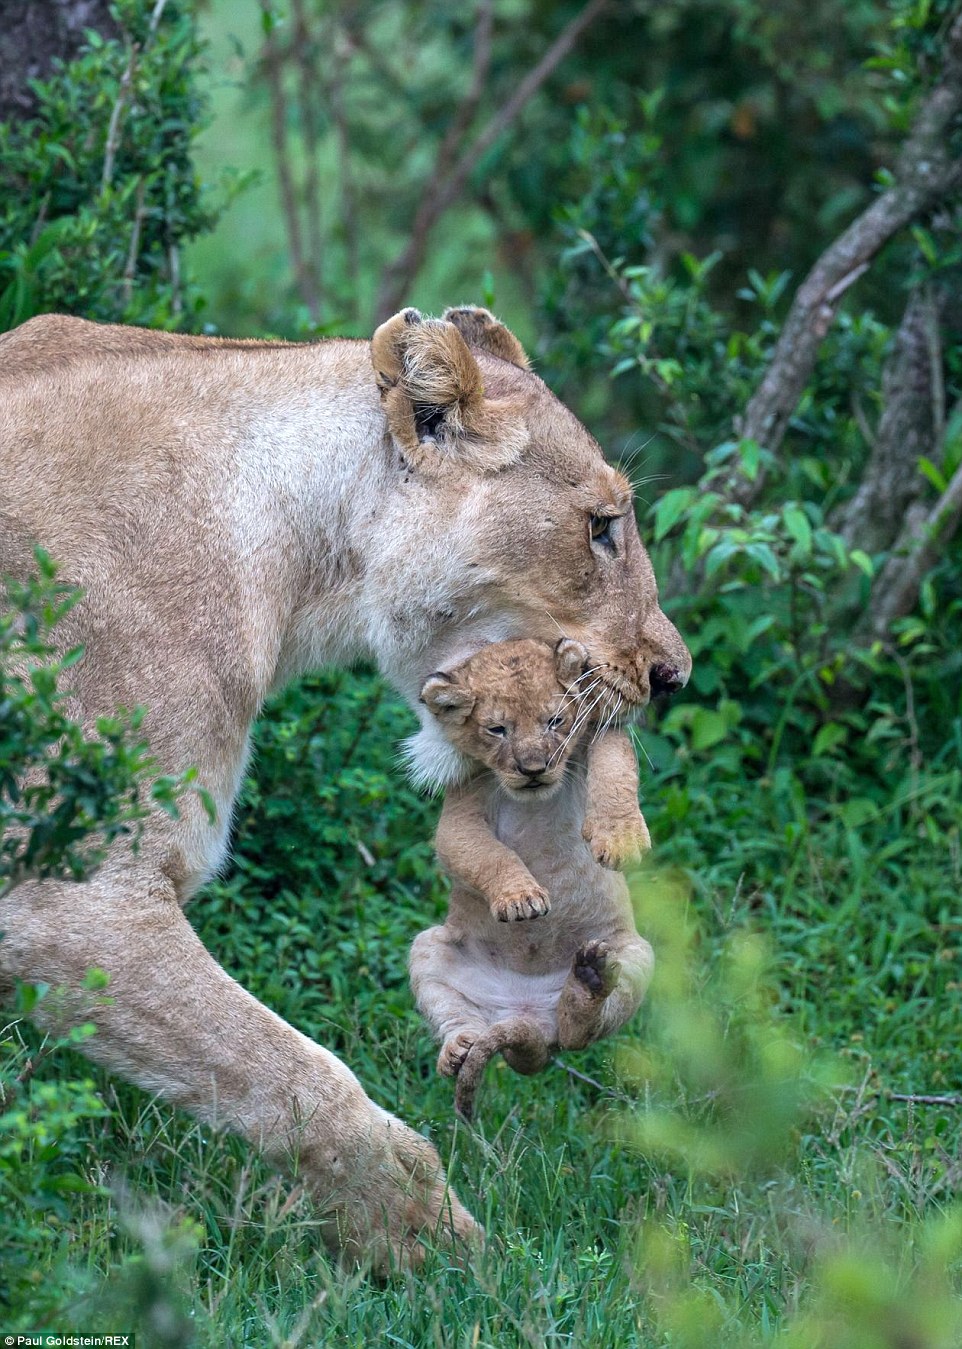 A lioness carries her five-week-old cub gently in her jaws, in Masai Mara, Kenya